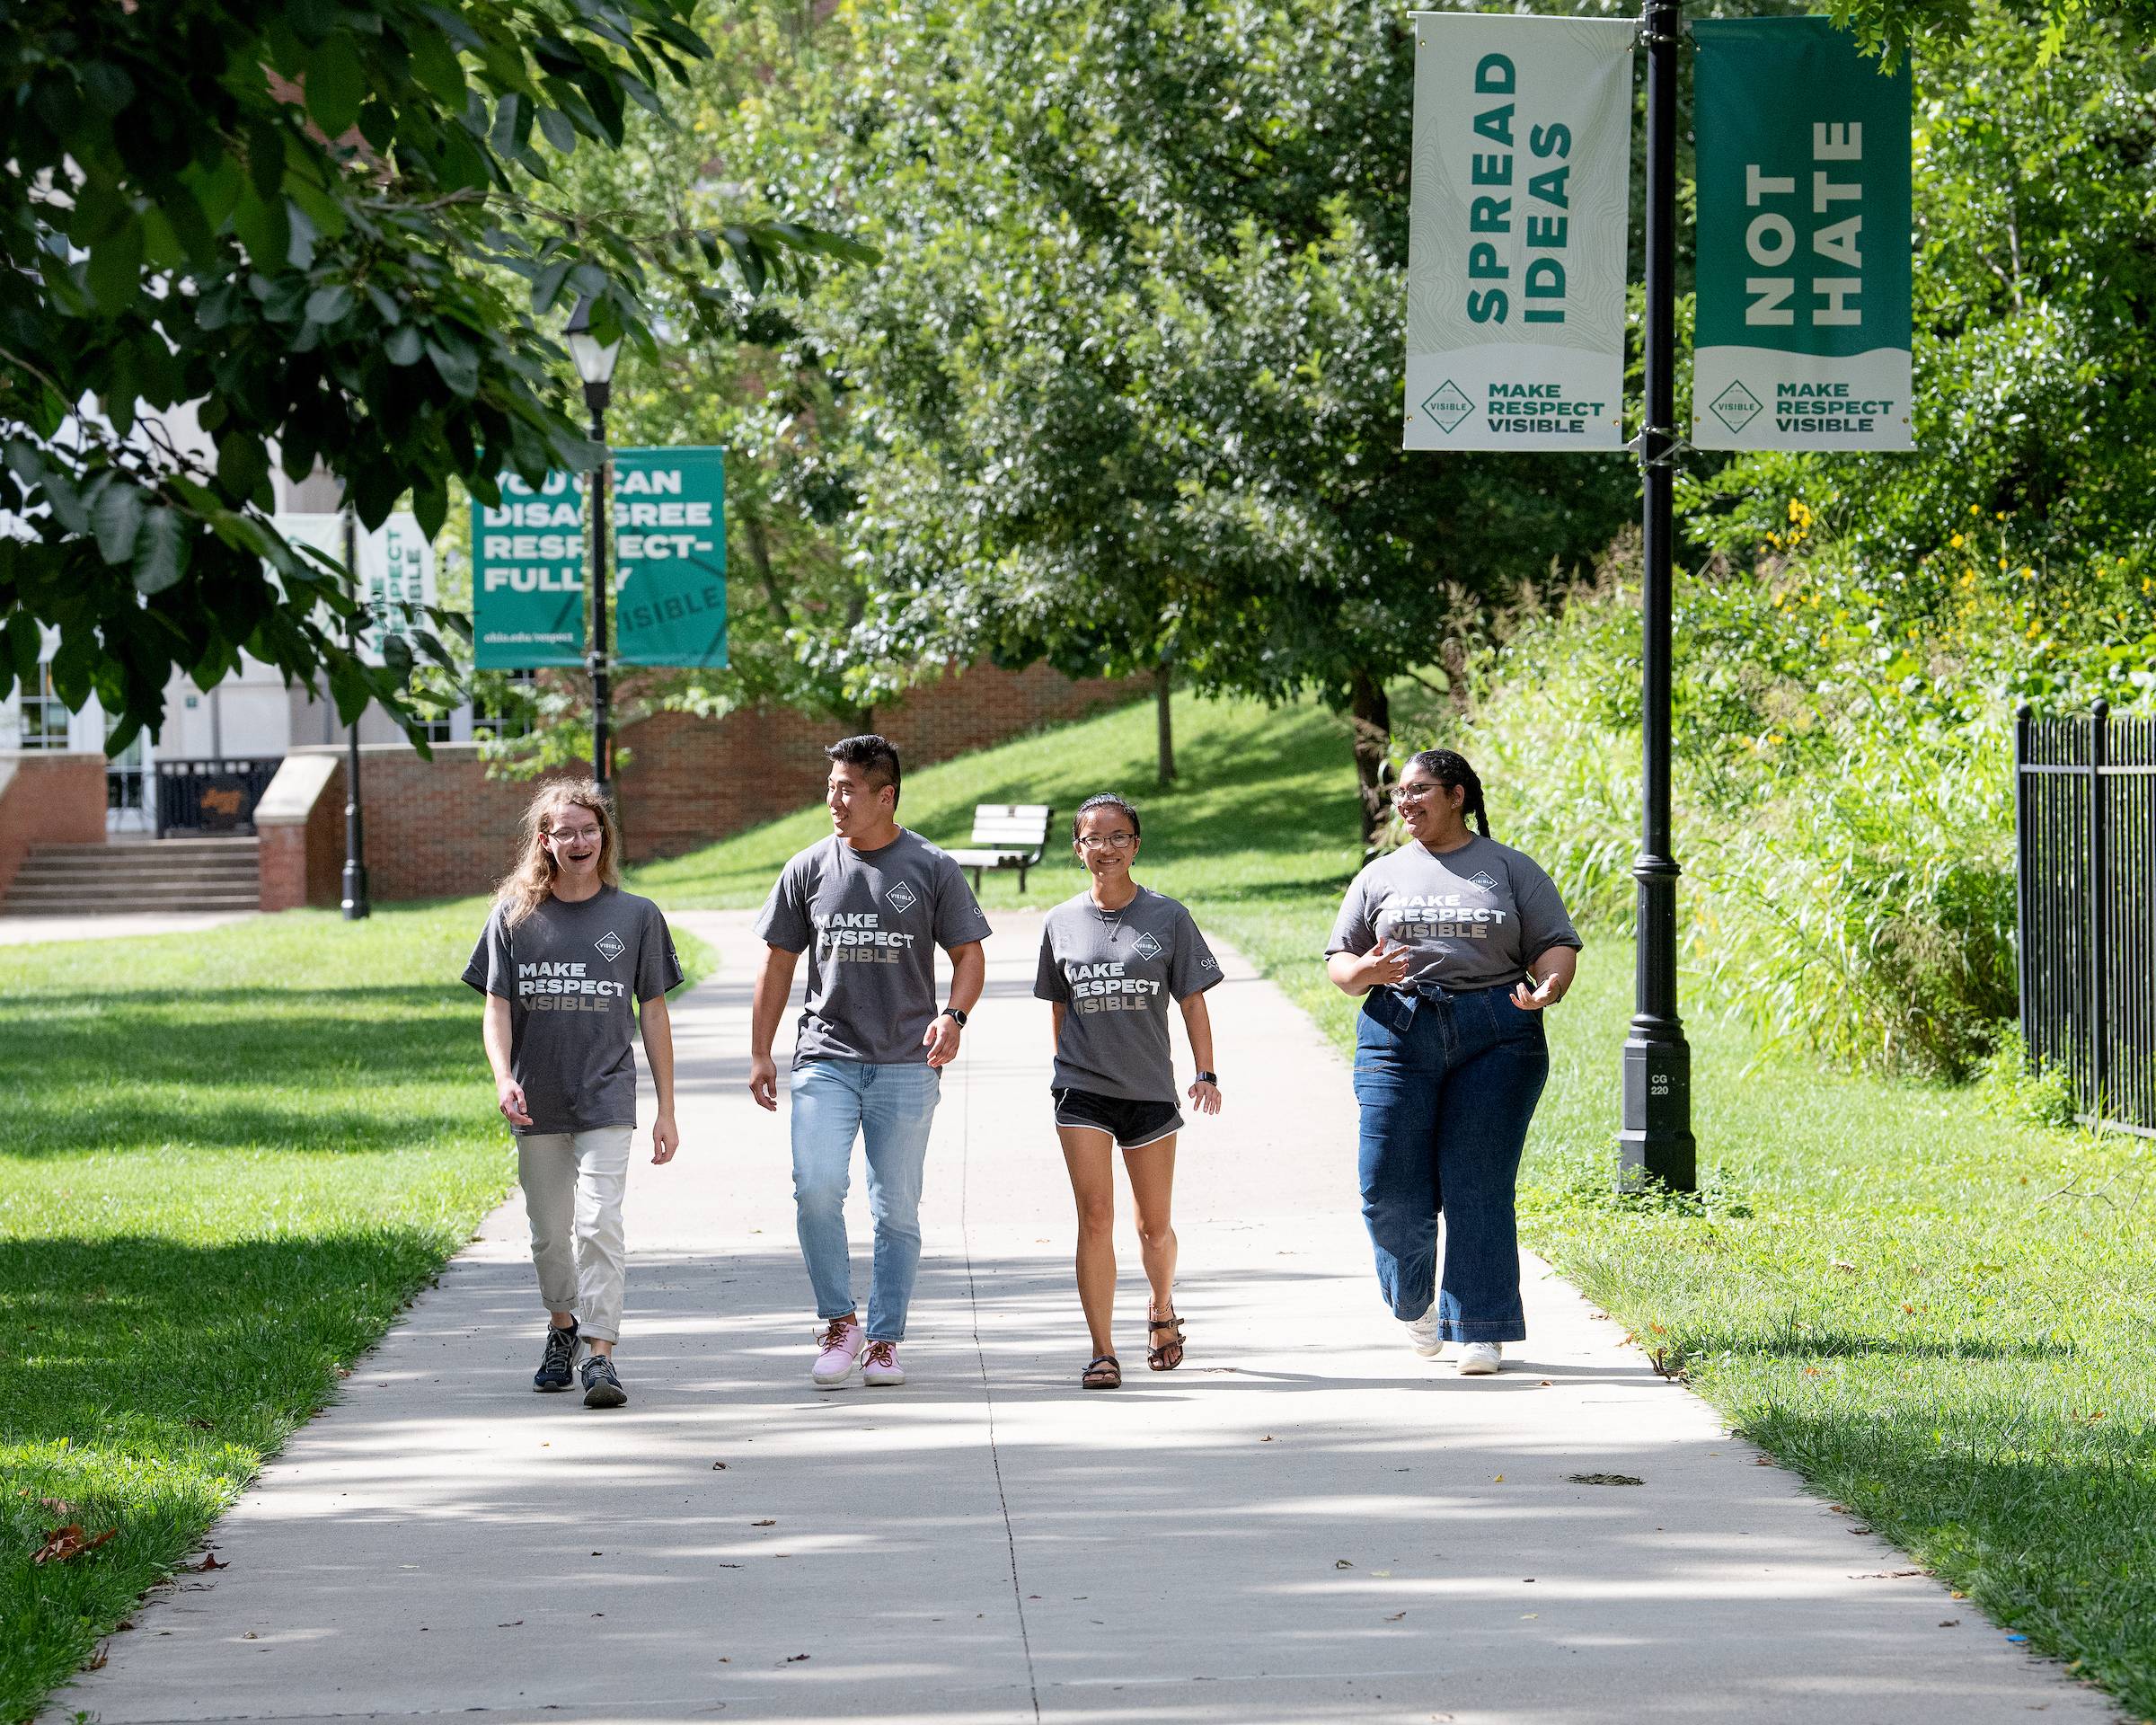 This fall, Ohio University was awarded the Higher Education Excellence in Diversity award (HEED) for the sixth consecutive year. The award is given annually by INSIGHT Into Diversity magazine, the oldest and largest diversity-focused publication in higher education.